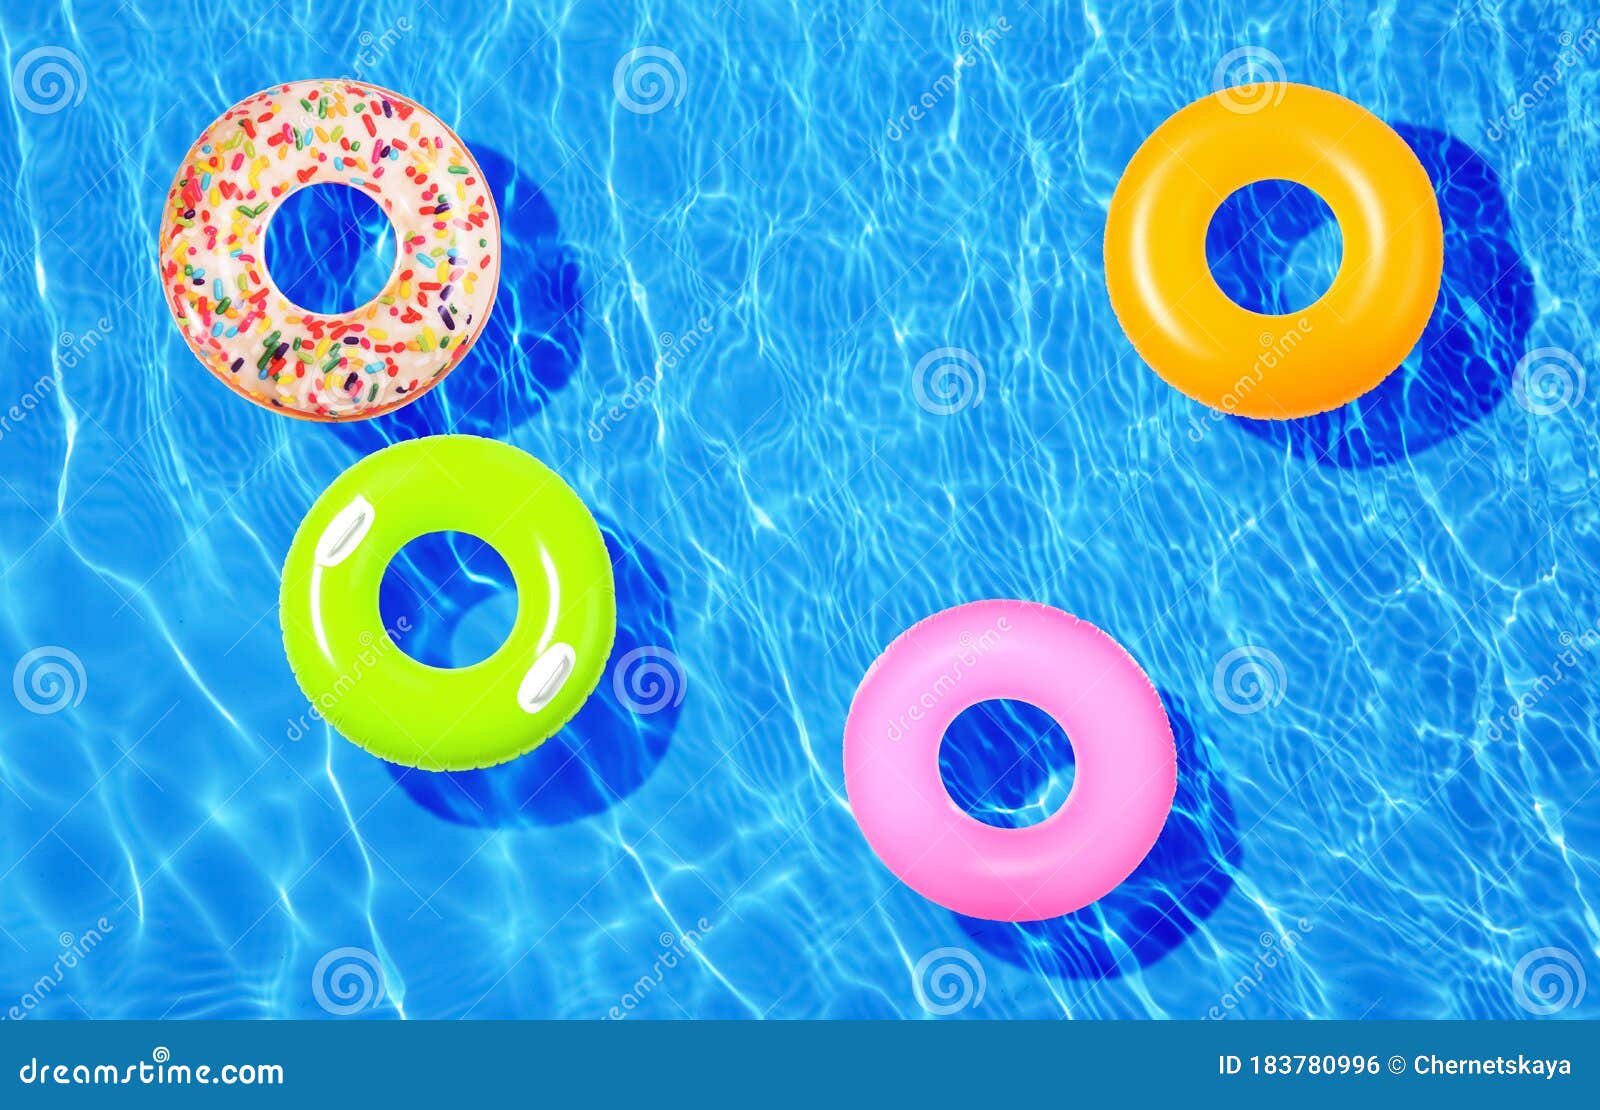 Different Inflatable Rings Floating in Swimming Pool Stock Photo ...